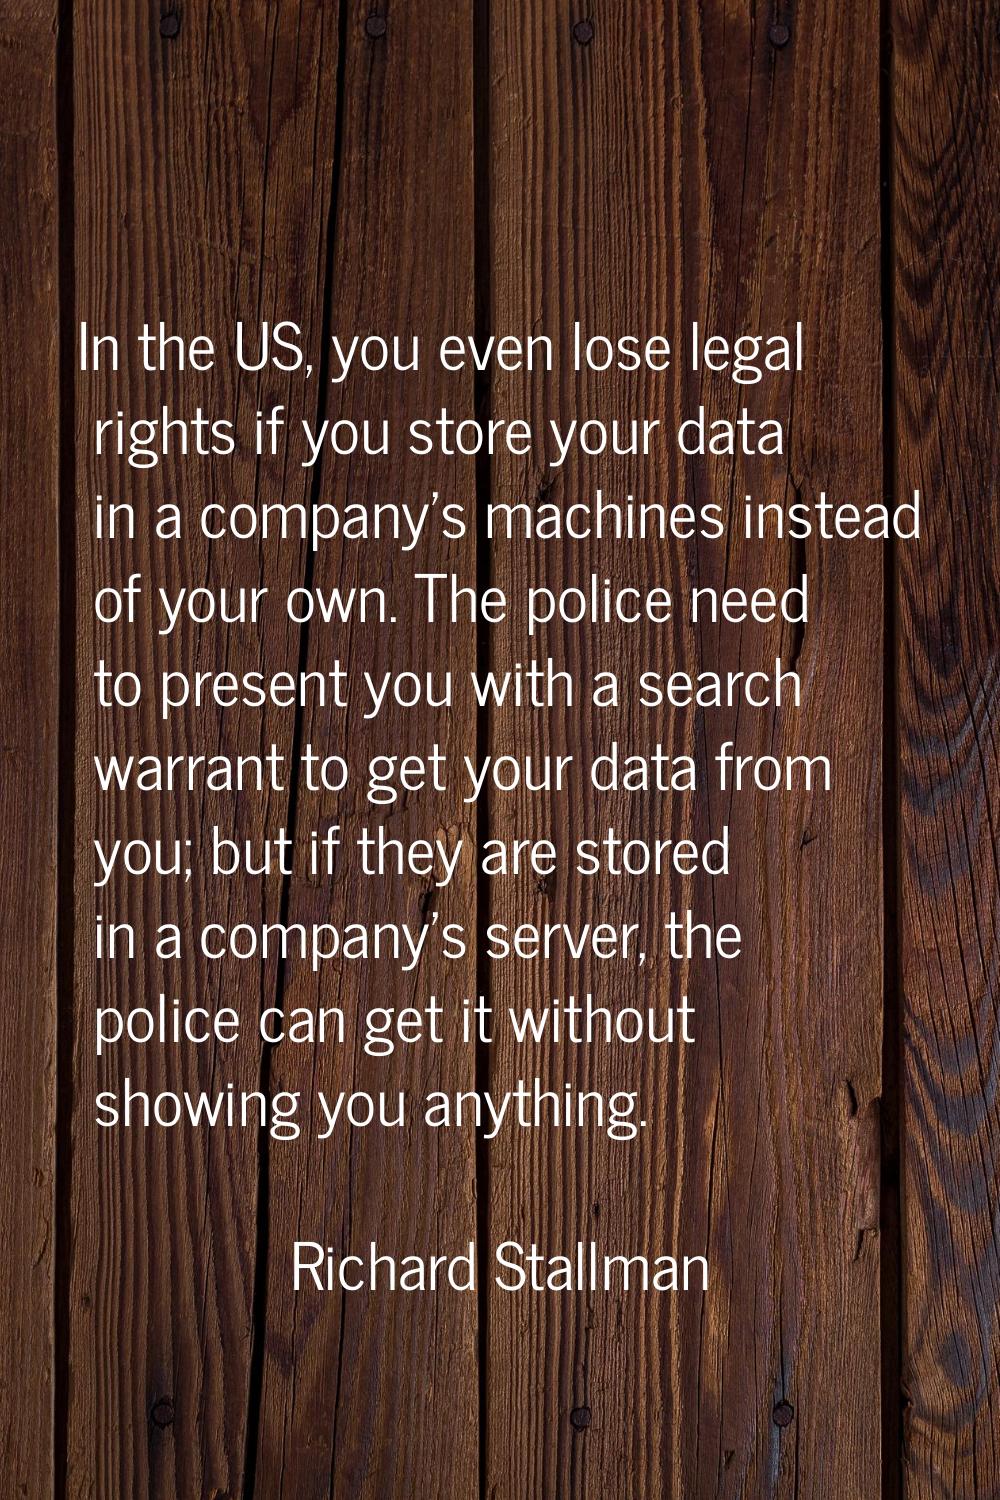 In the US, you even lose legal rights if you store your data in a company's machines instead of you